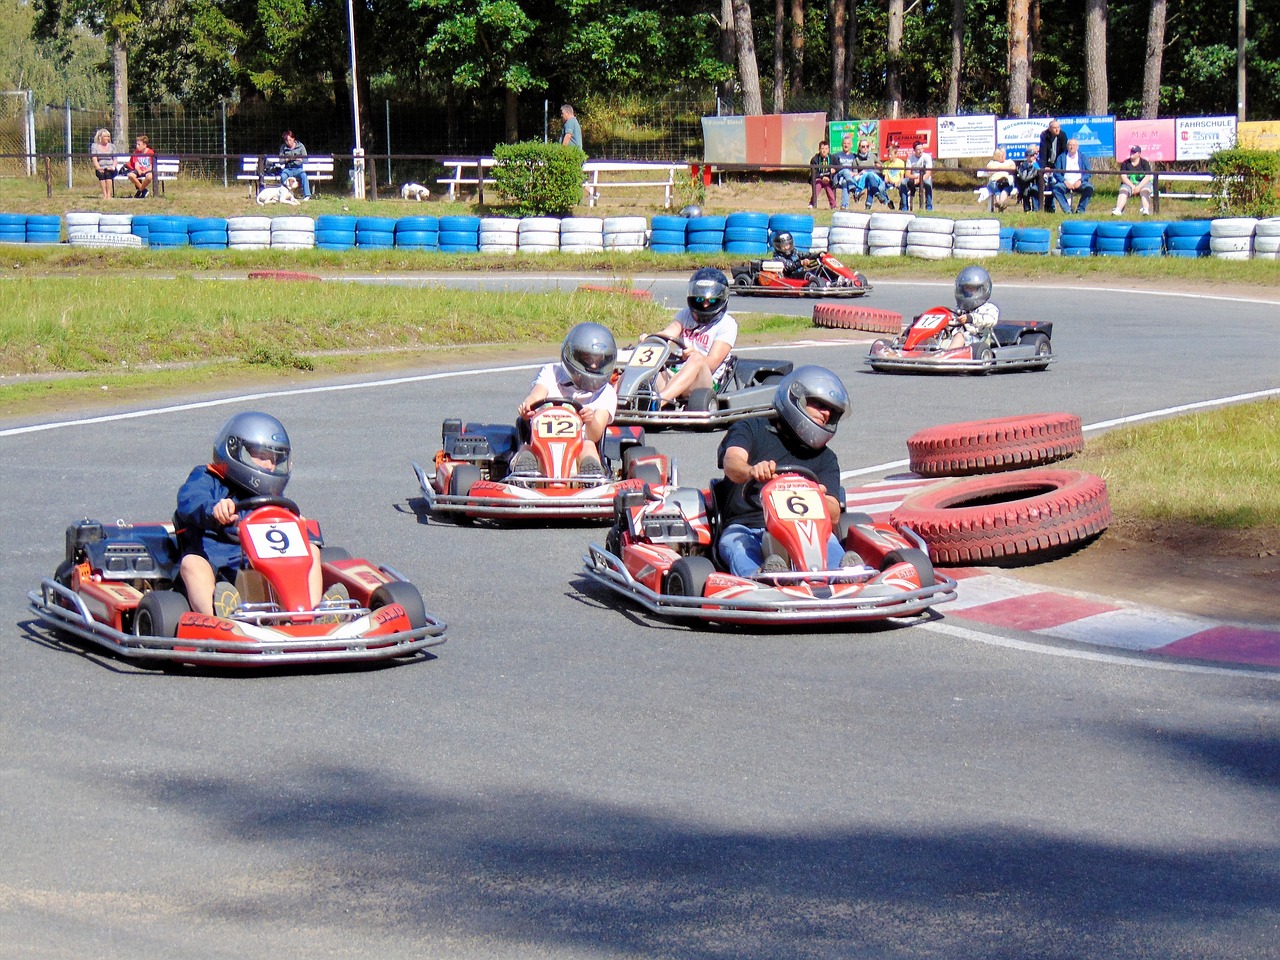 group of people go karting outside